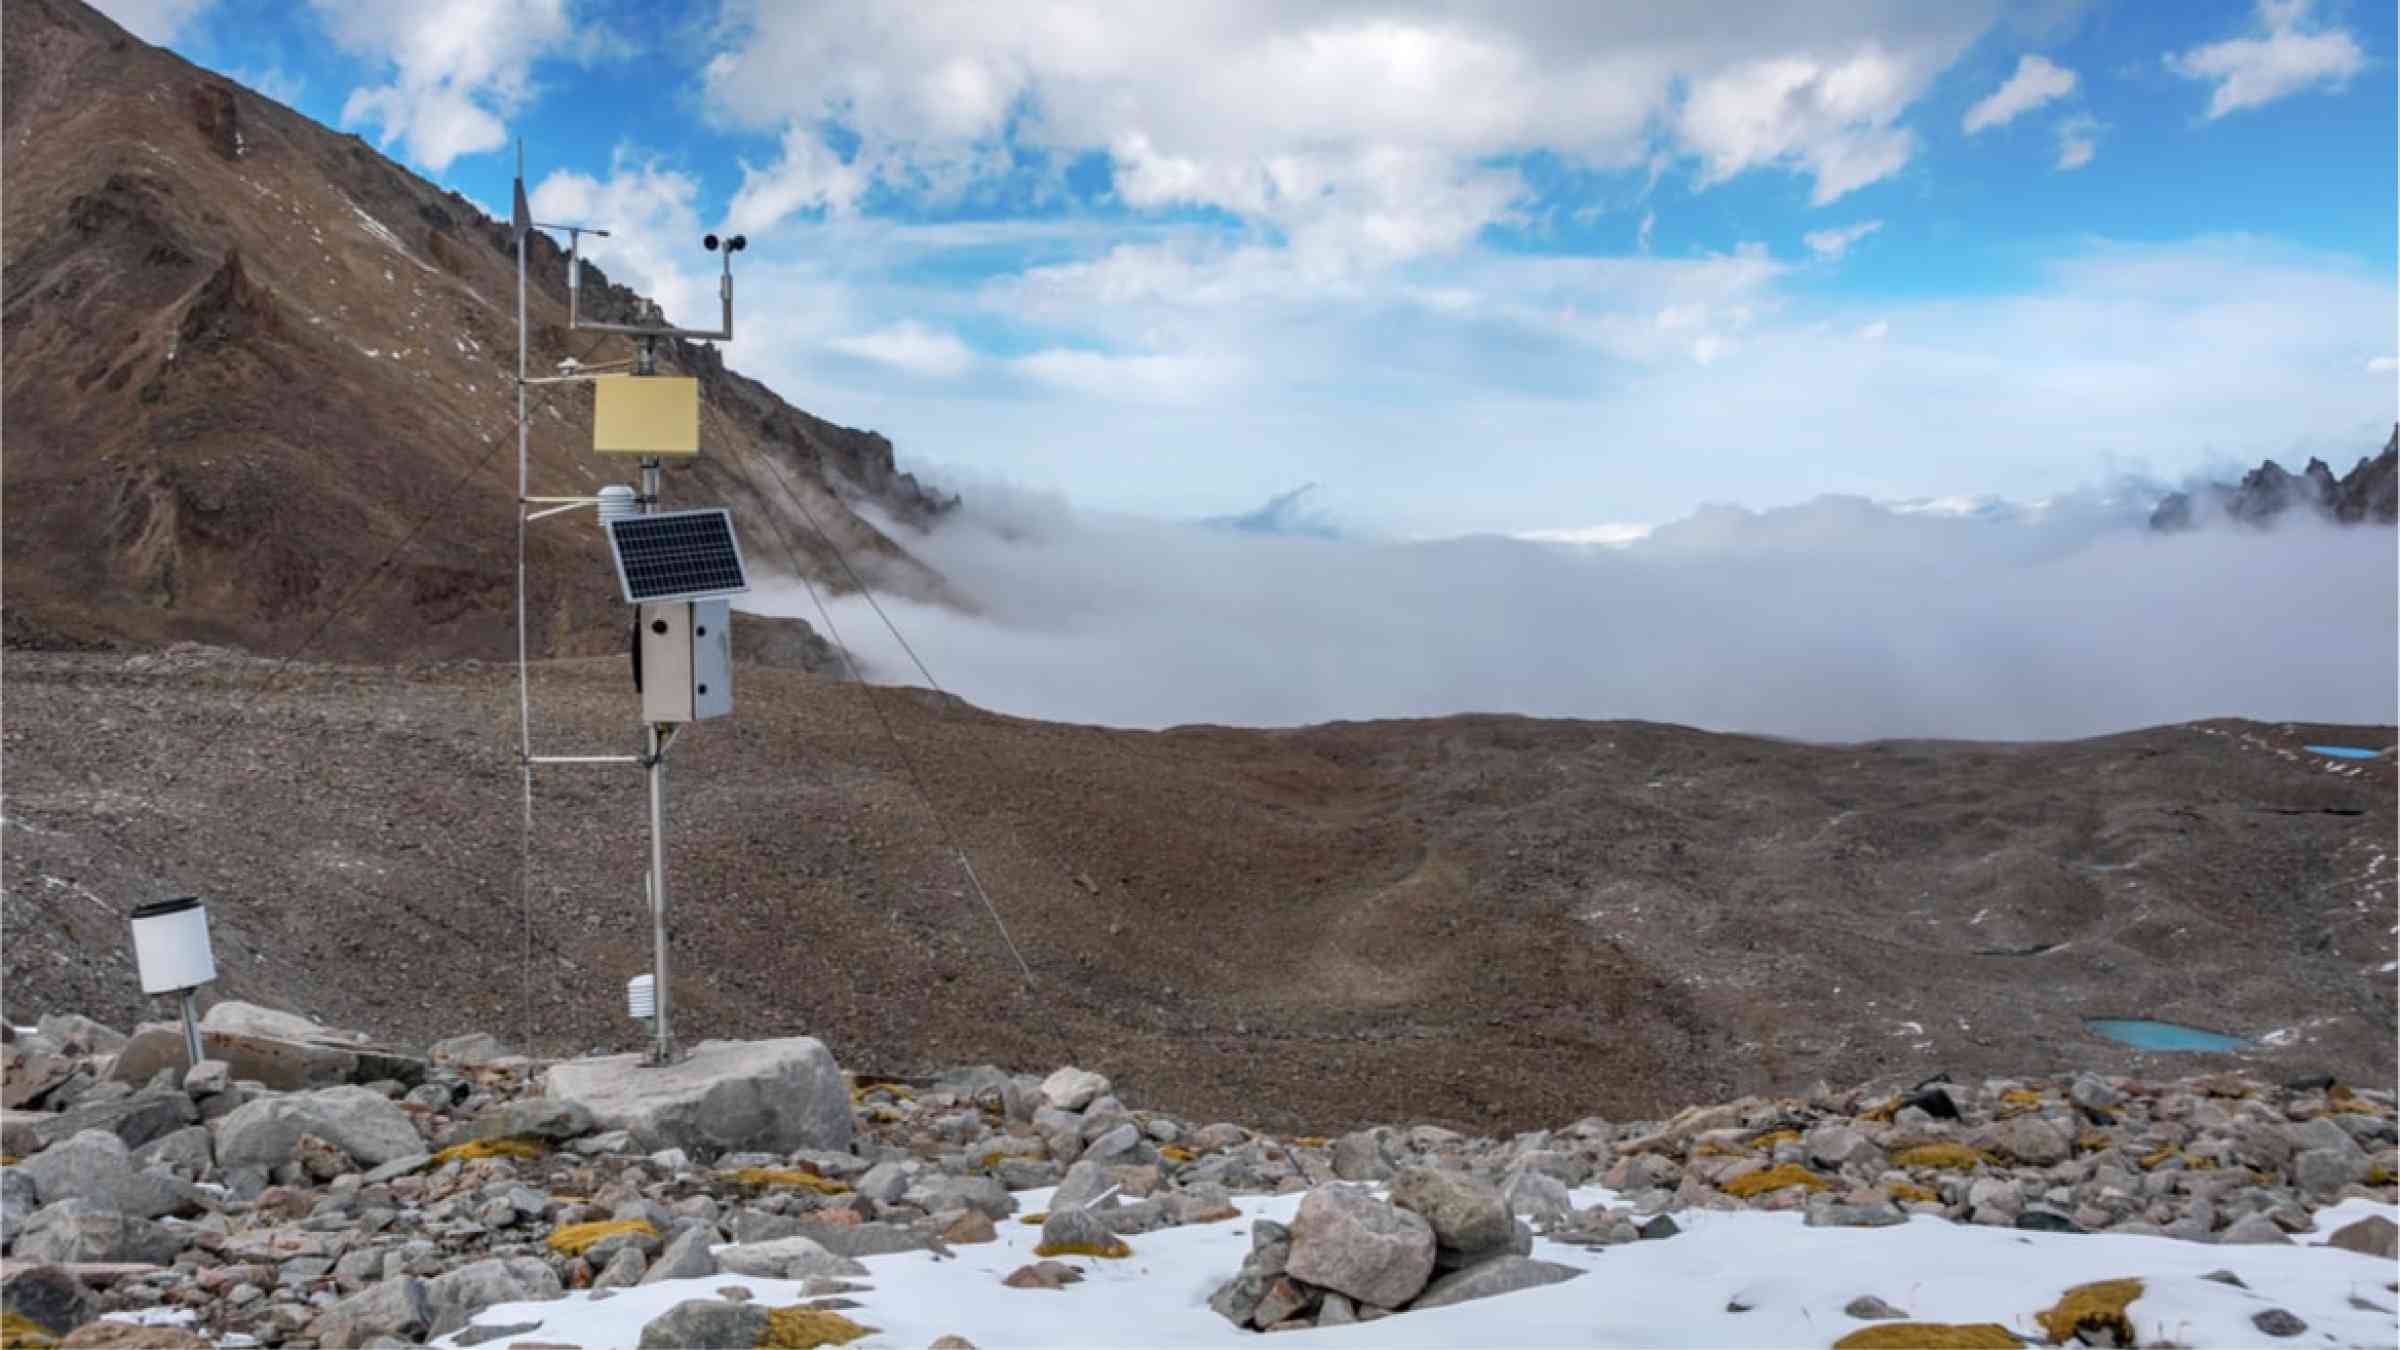 A weather station in the mountains of the Kyrgyz Republic.